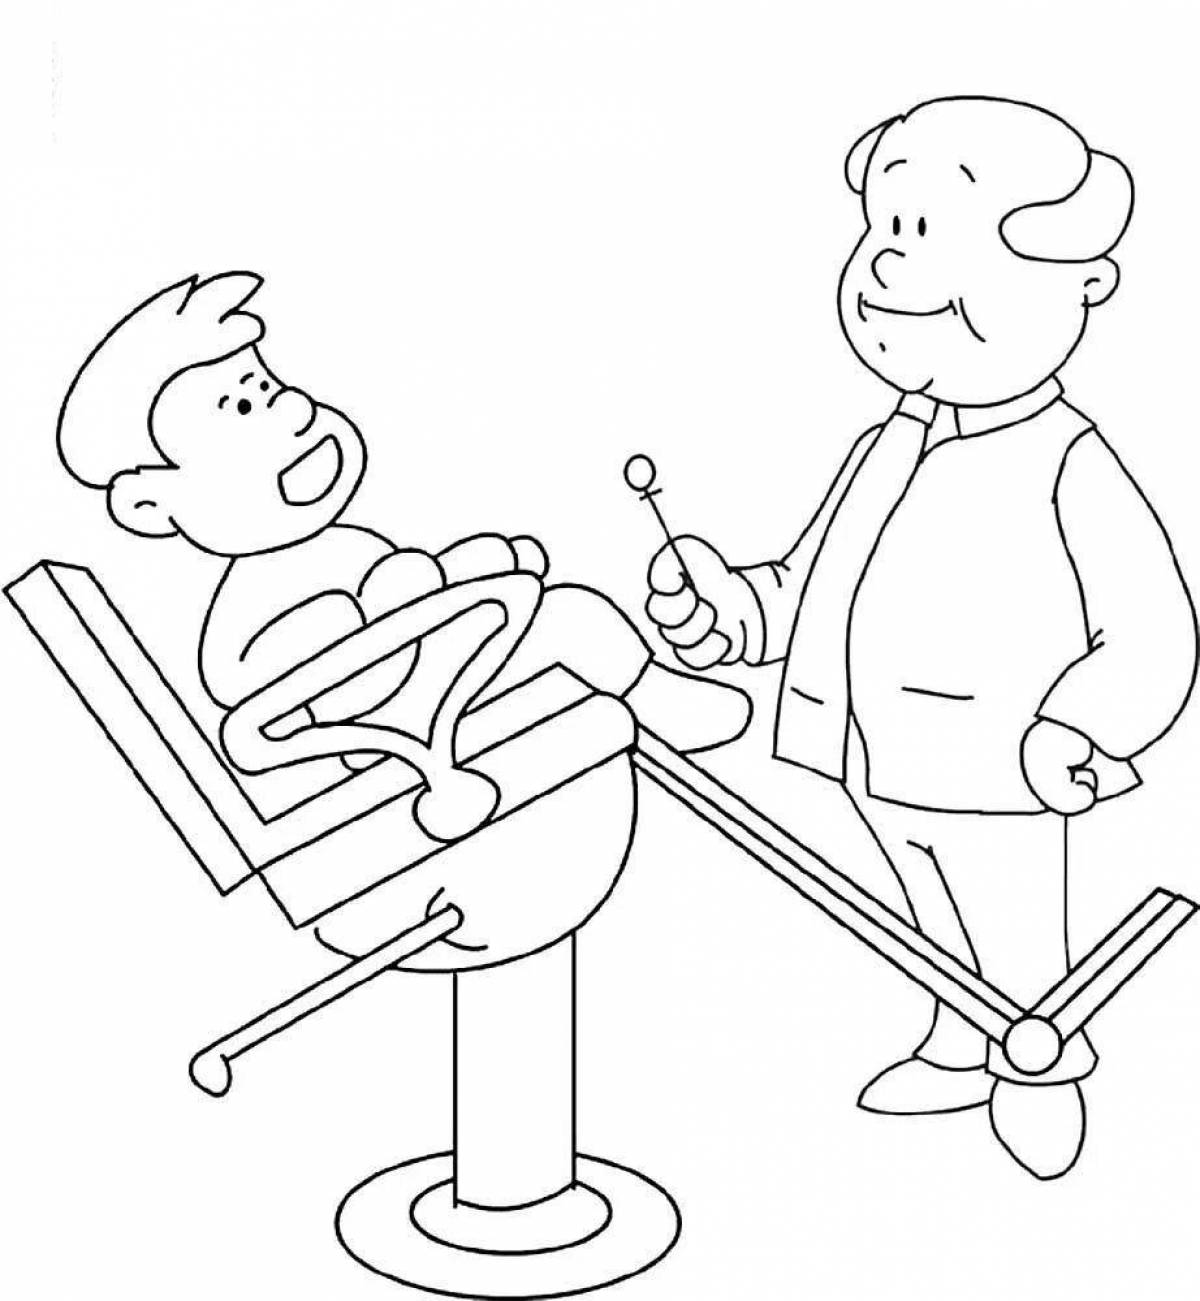 Dentist shimmer coloring page